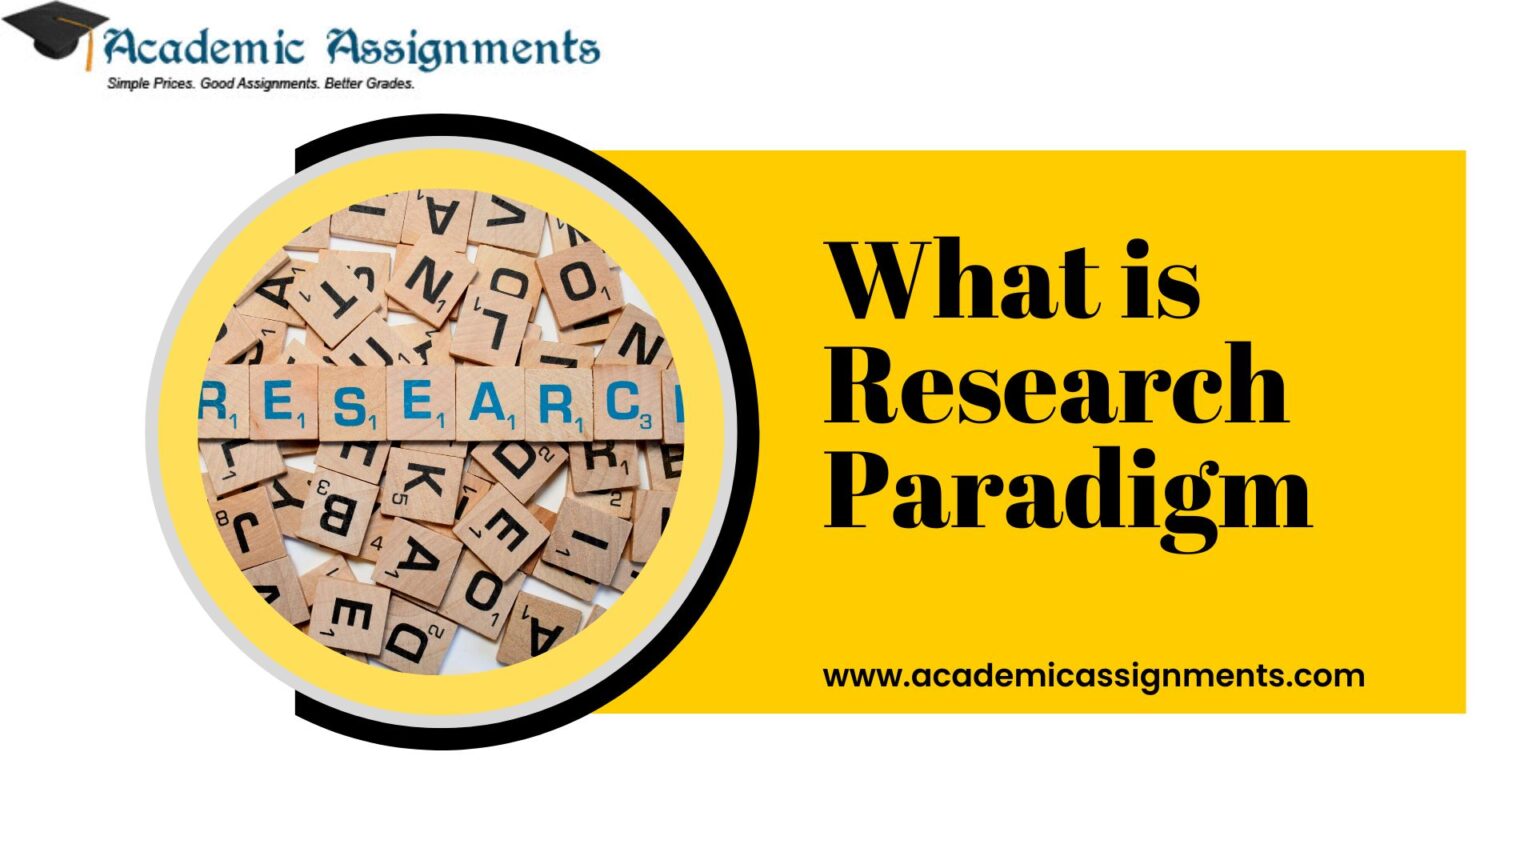 why are research paradigms important